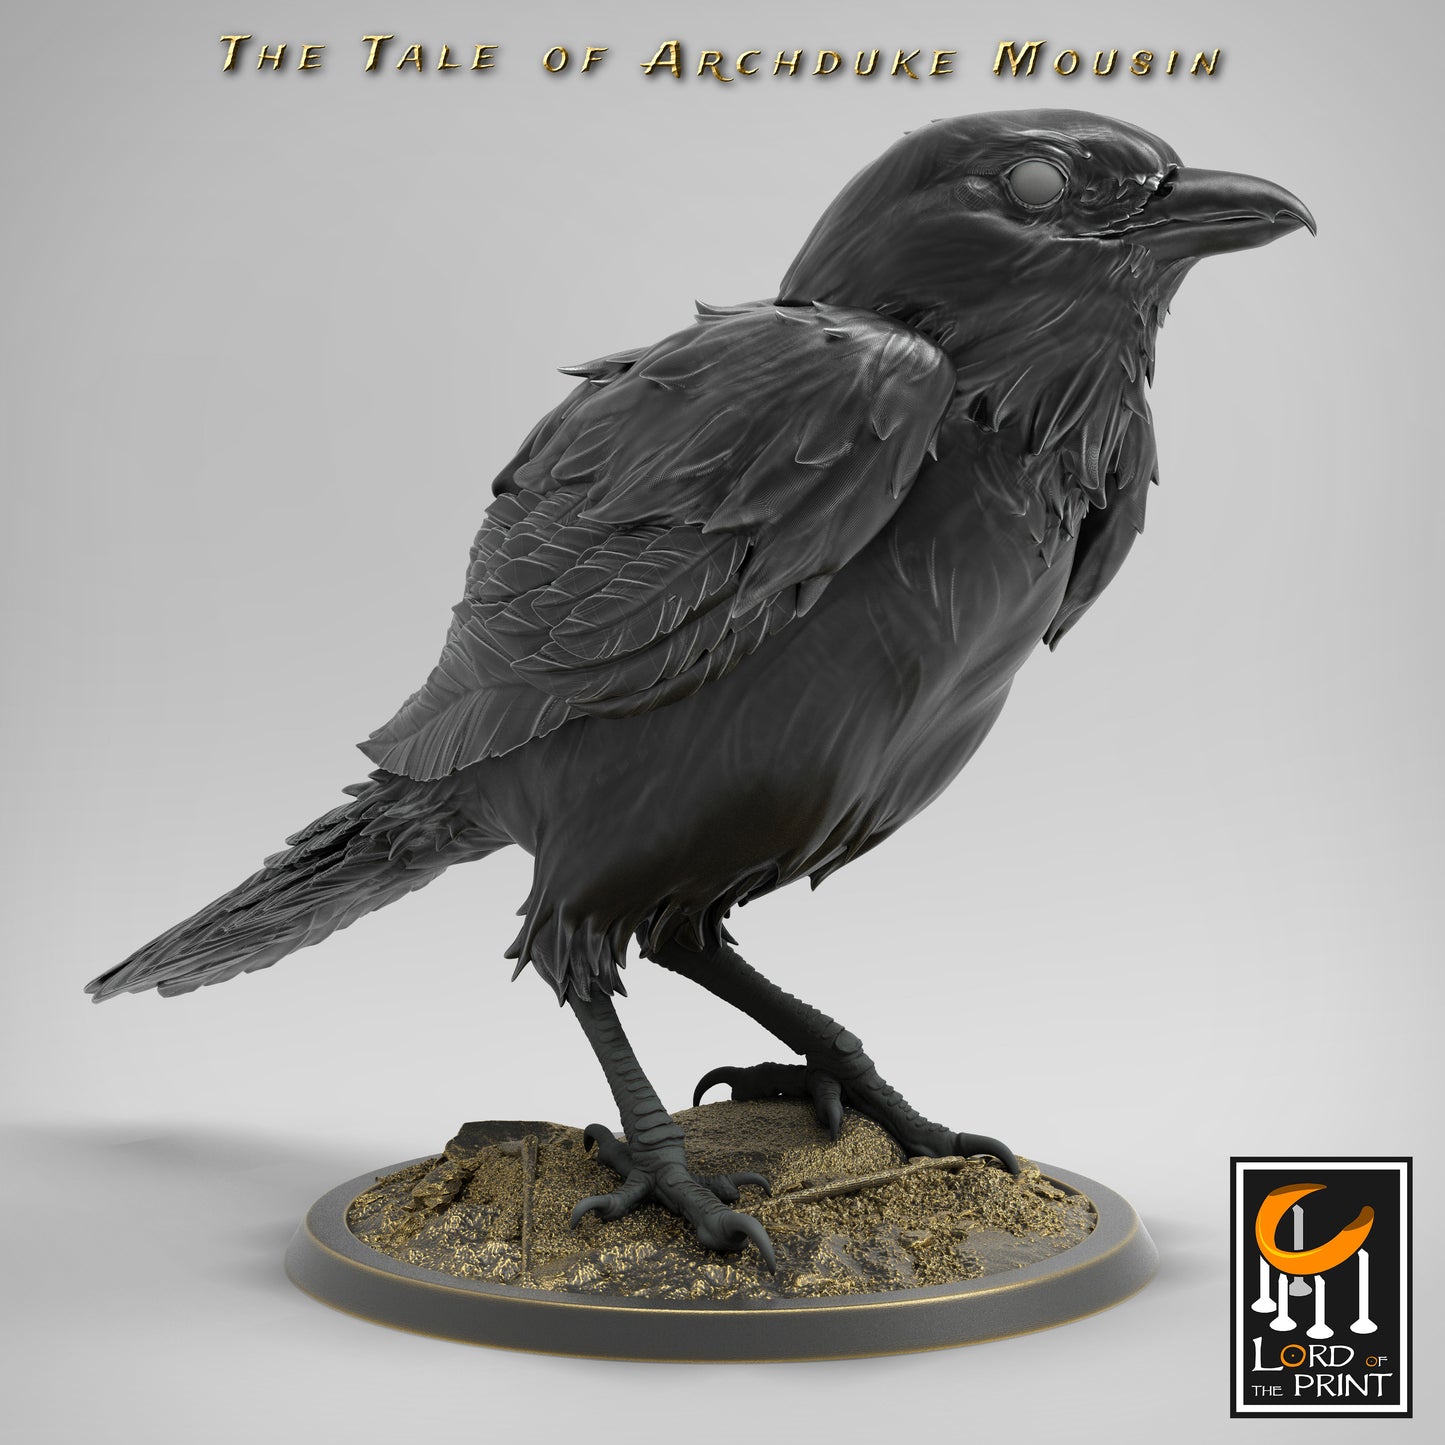 Magpies - The tale of Archduke Mousin